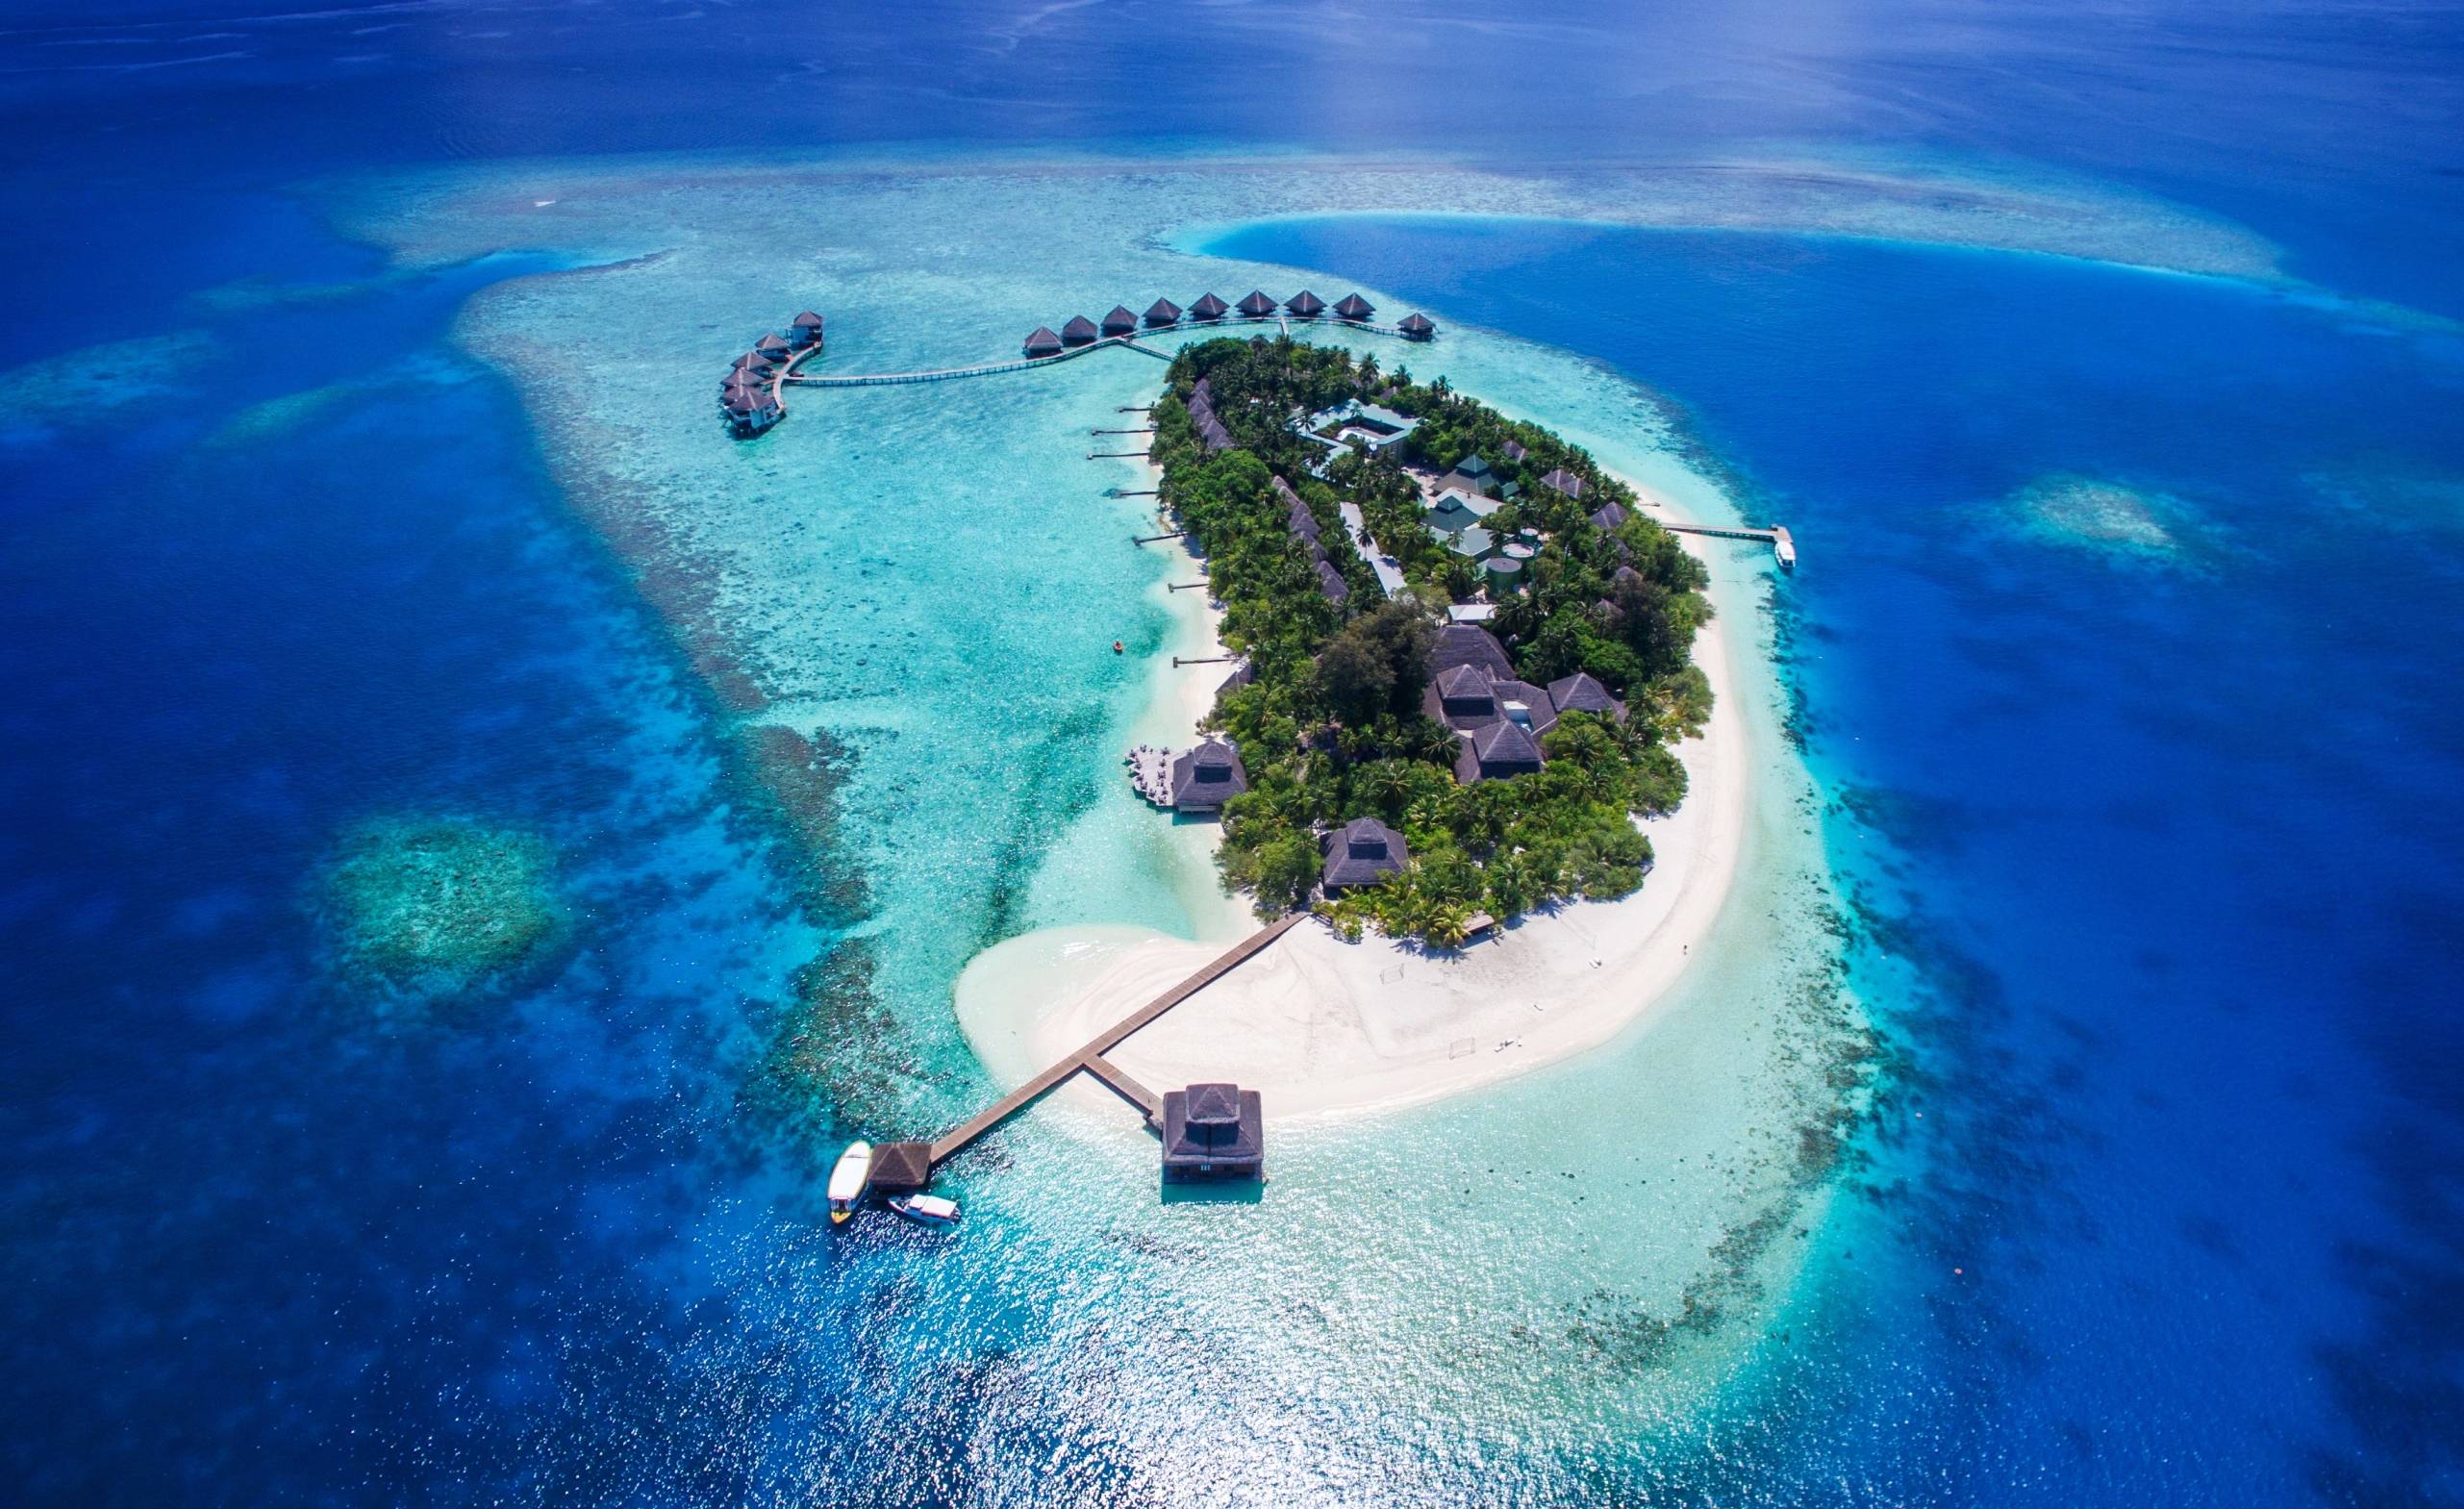 Flash sale! All Inclusive Water Bungalow at the Adaaran Club in the Maldives